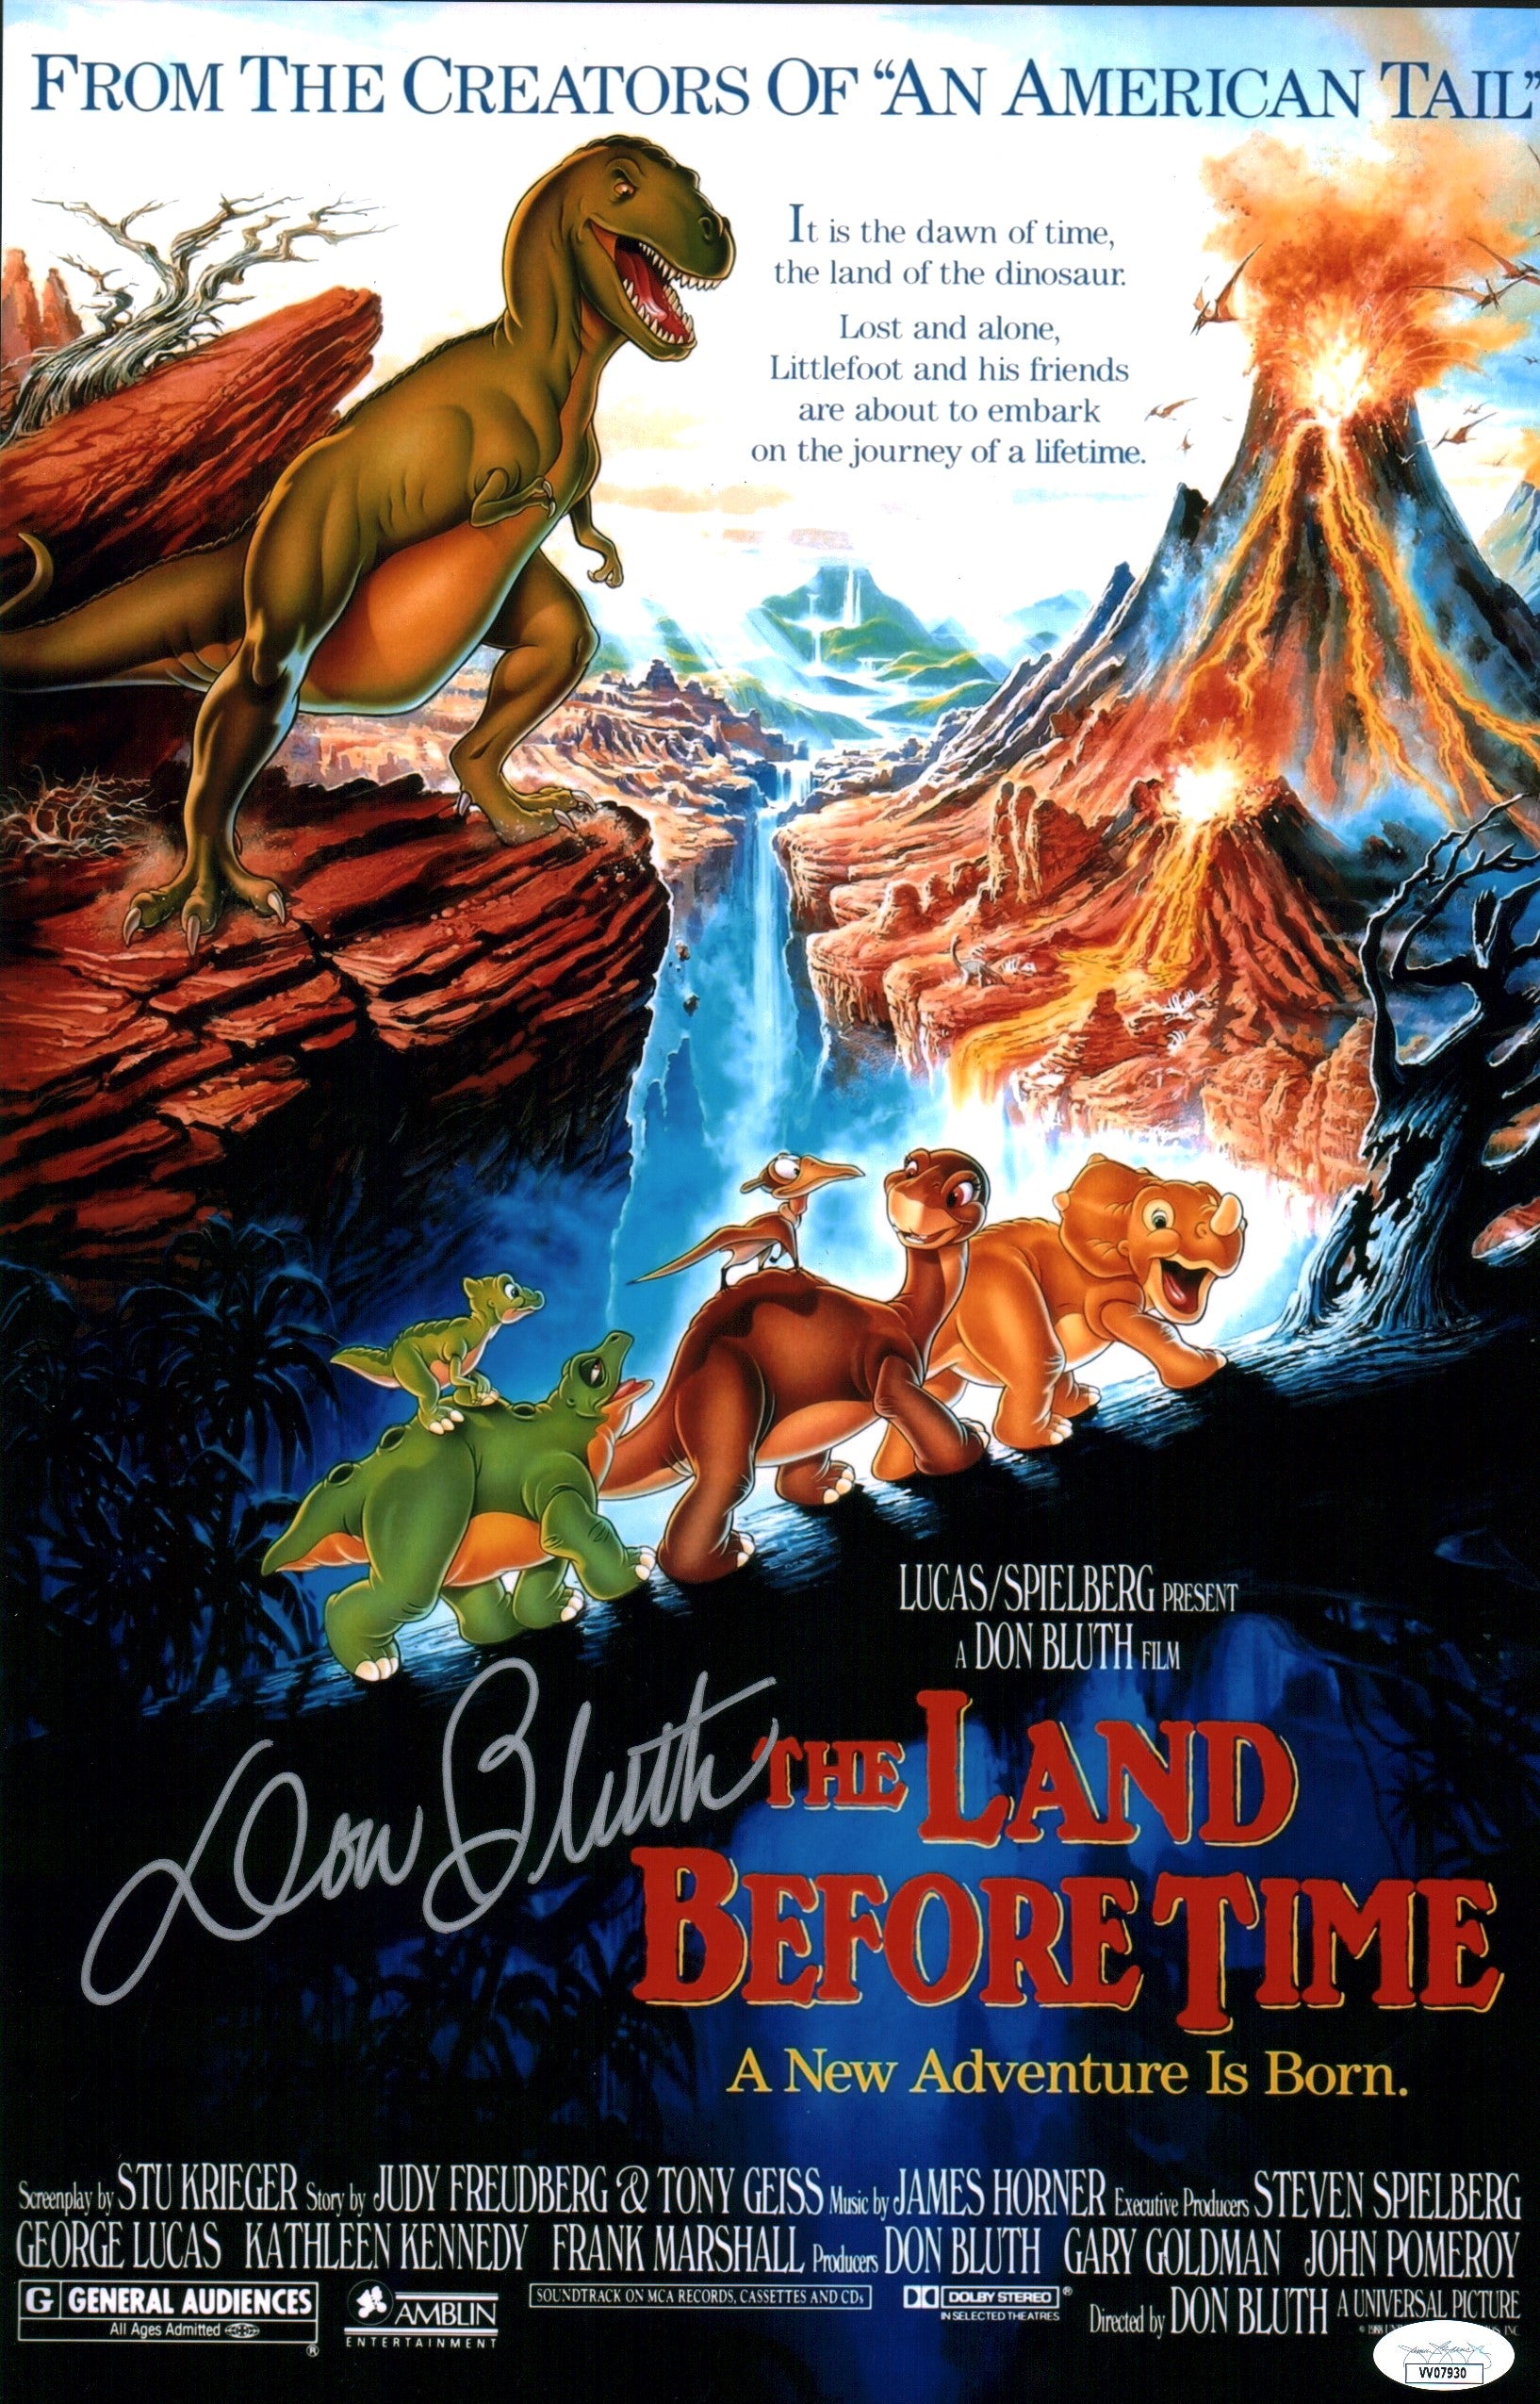 Don Bluth The Land Before Time 11x17 Signed Photo Poster JSA COA Certified Autograph